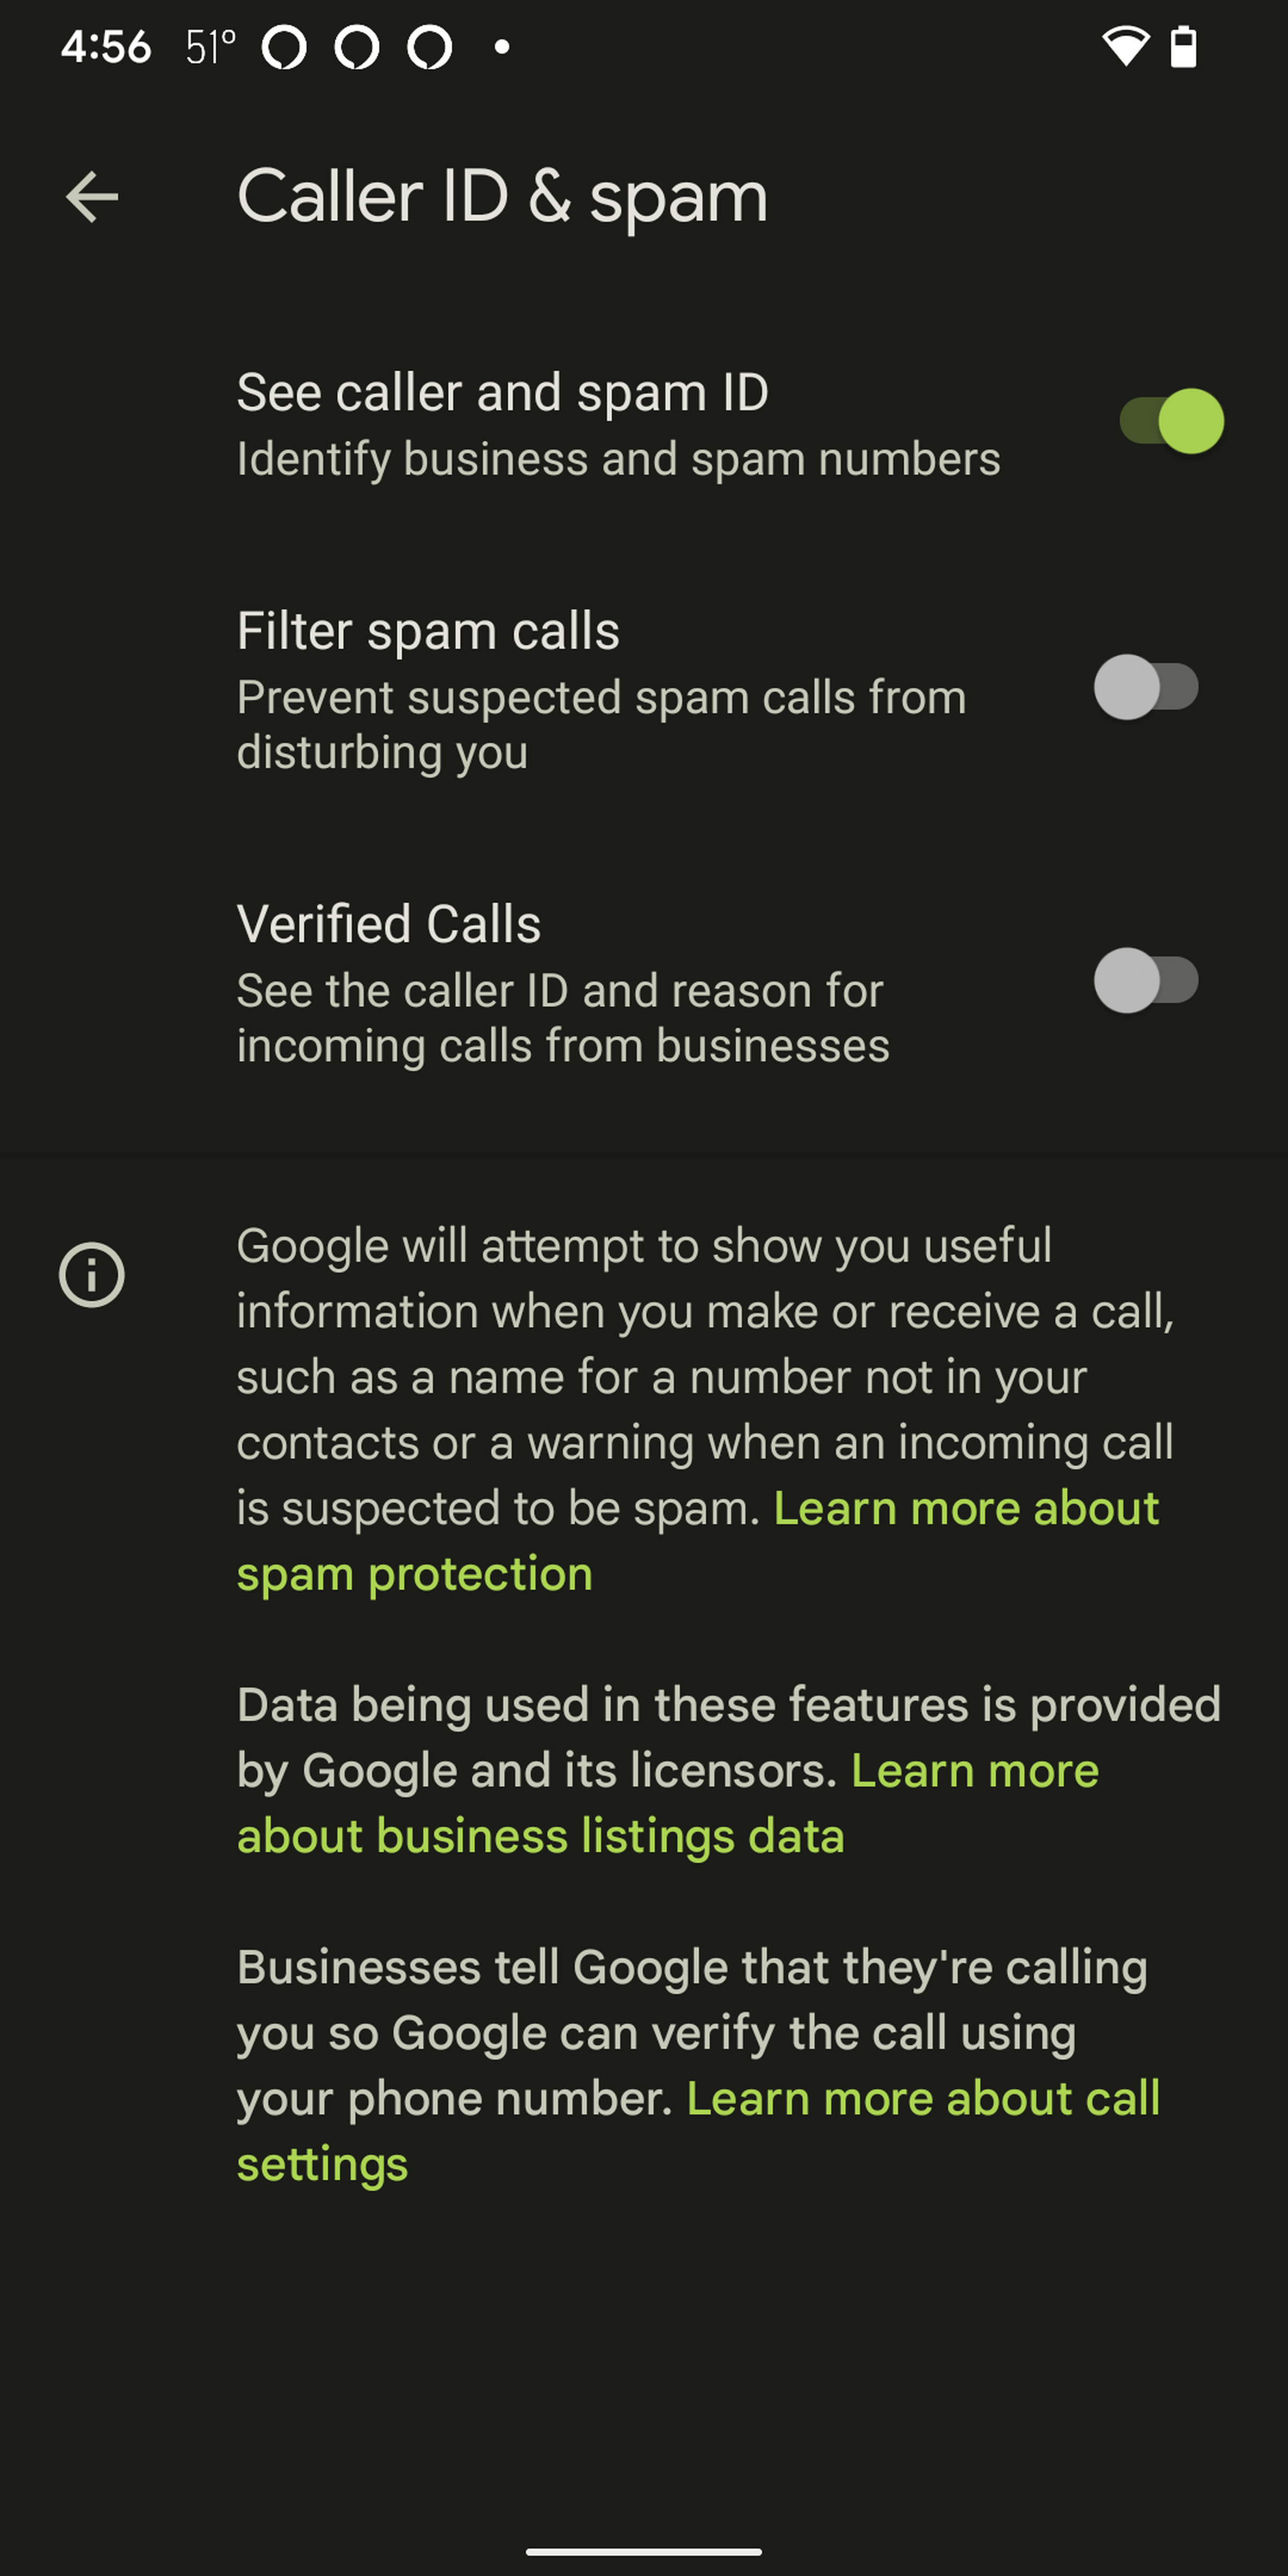 You can choose to filter suspected spam calls so you won’t have to deal with them.